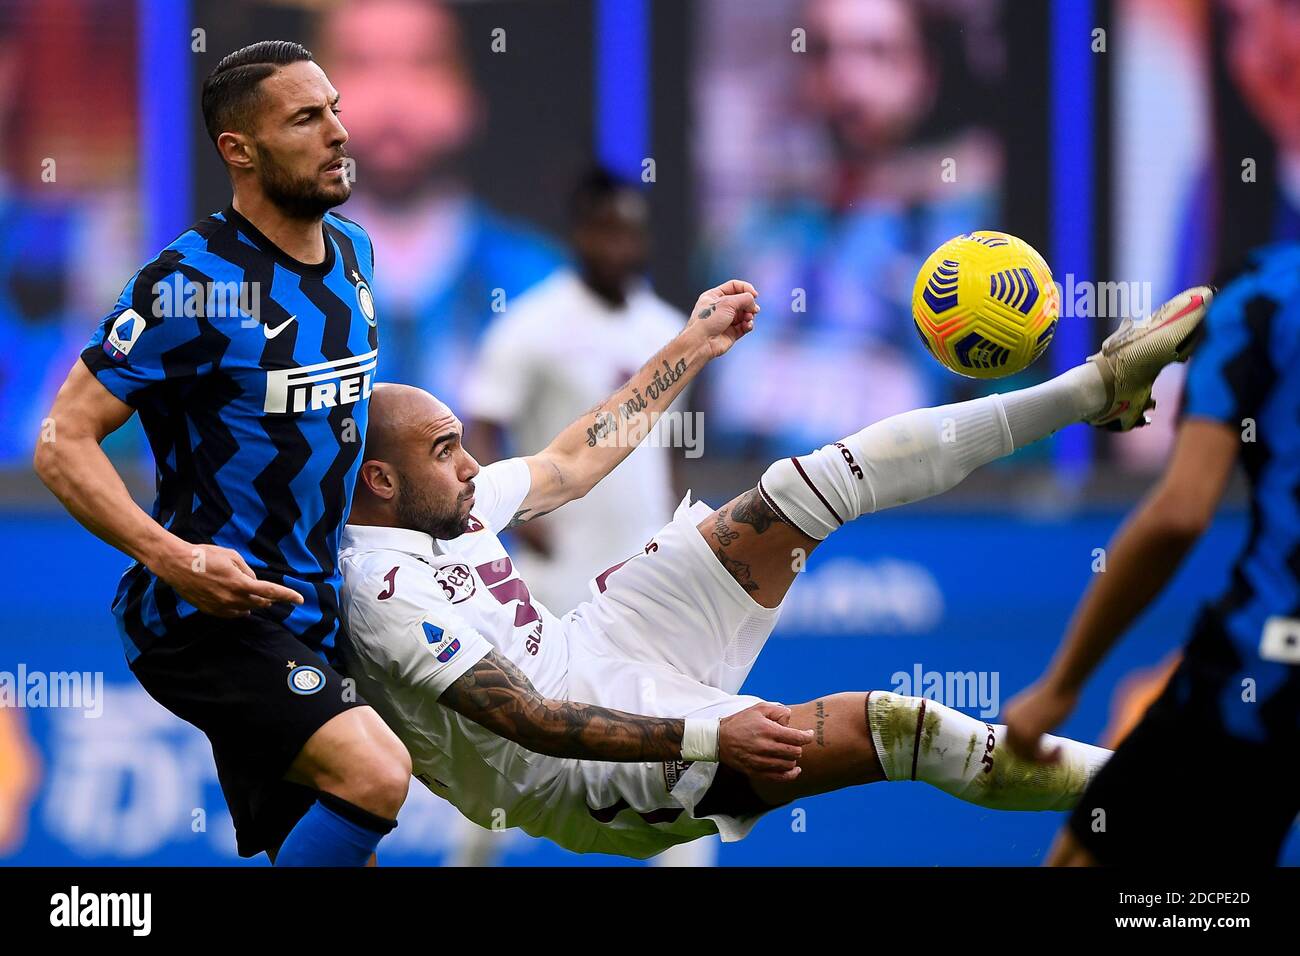 Milan, Italy - 22 November, 2020: Simone Zaza (C) of Torino FC attempts a bicycle kick during the Serie A football match between FC Internazionale and Torino FC. FC Internazionale won 4-2 over Torino FC. Credit: Nicolò Campo/Alamy Live News Stock Photo